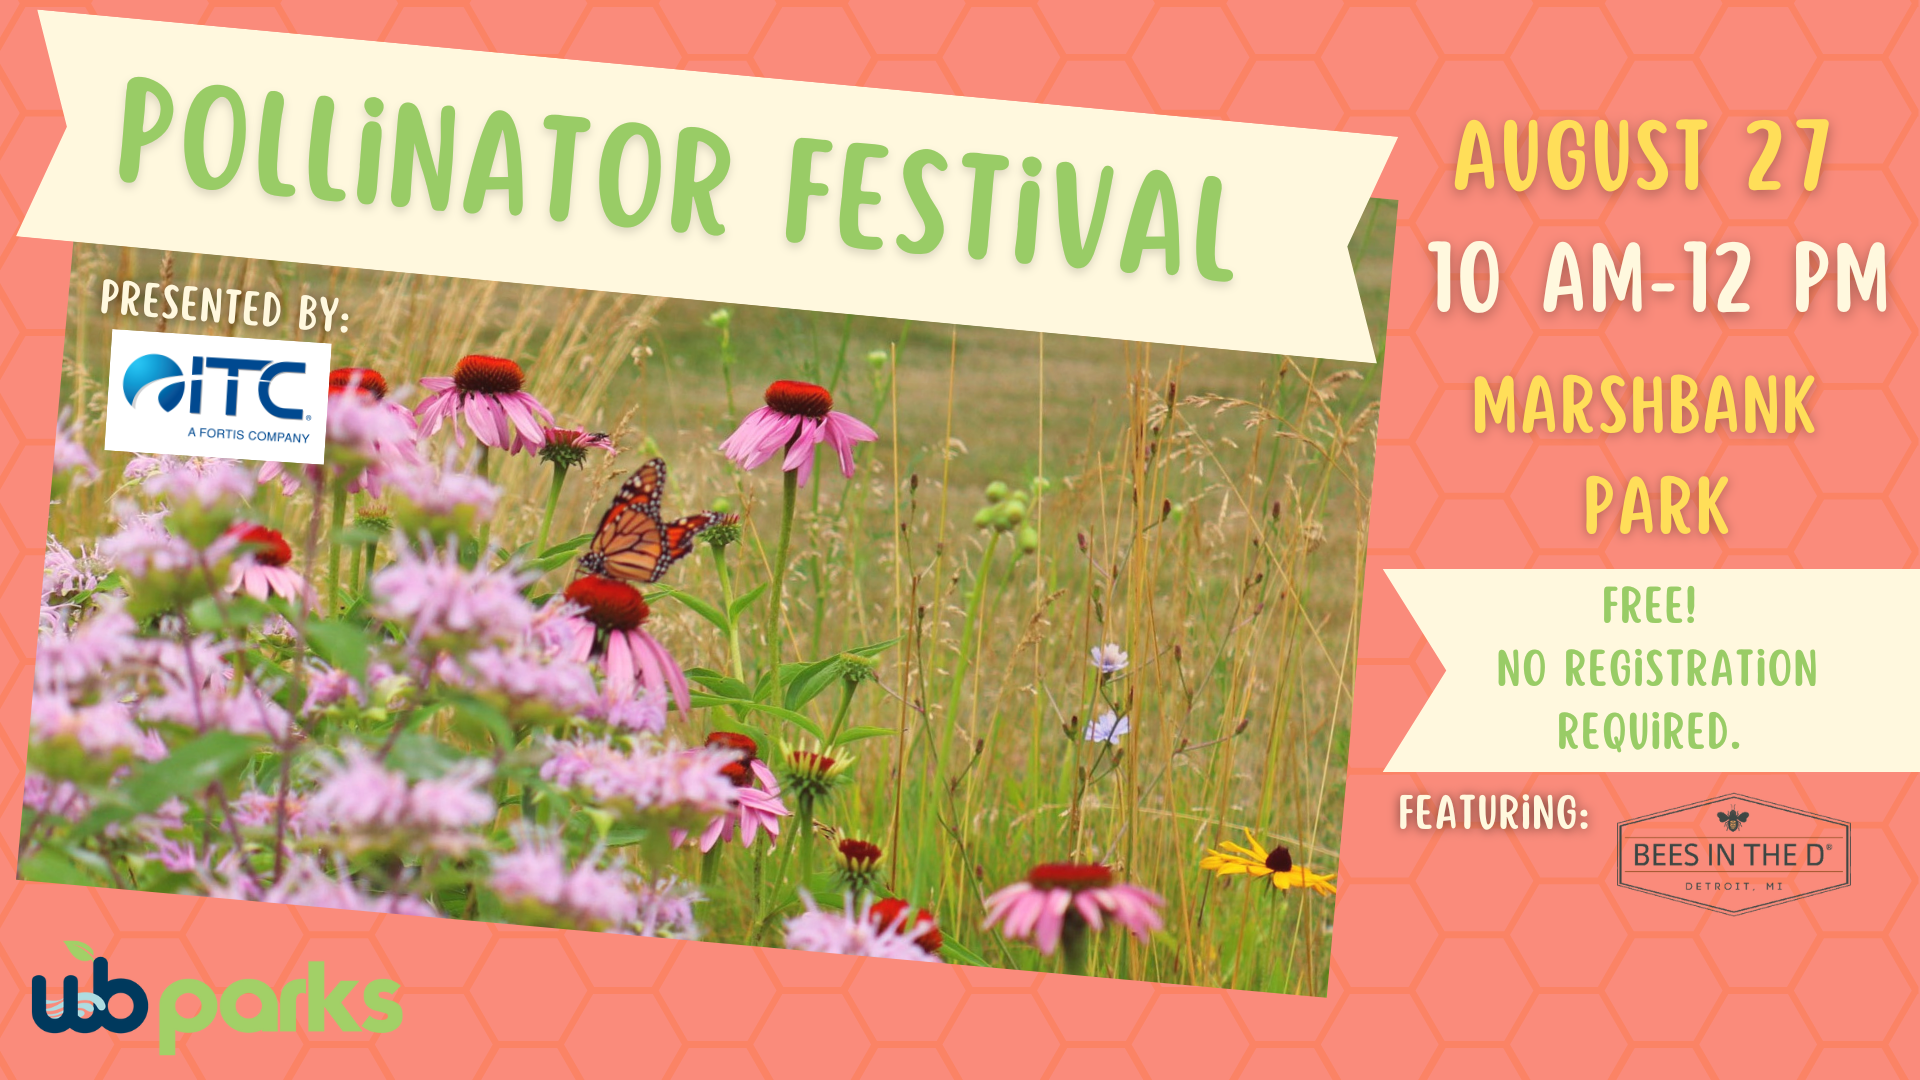 Our first annual FREE Pollinator Festival is this Saturday!